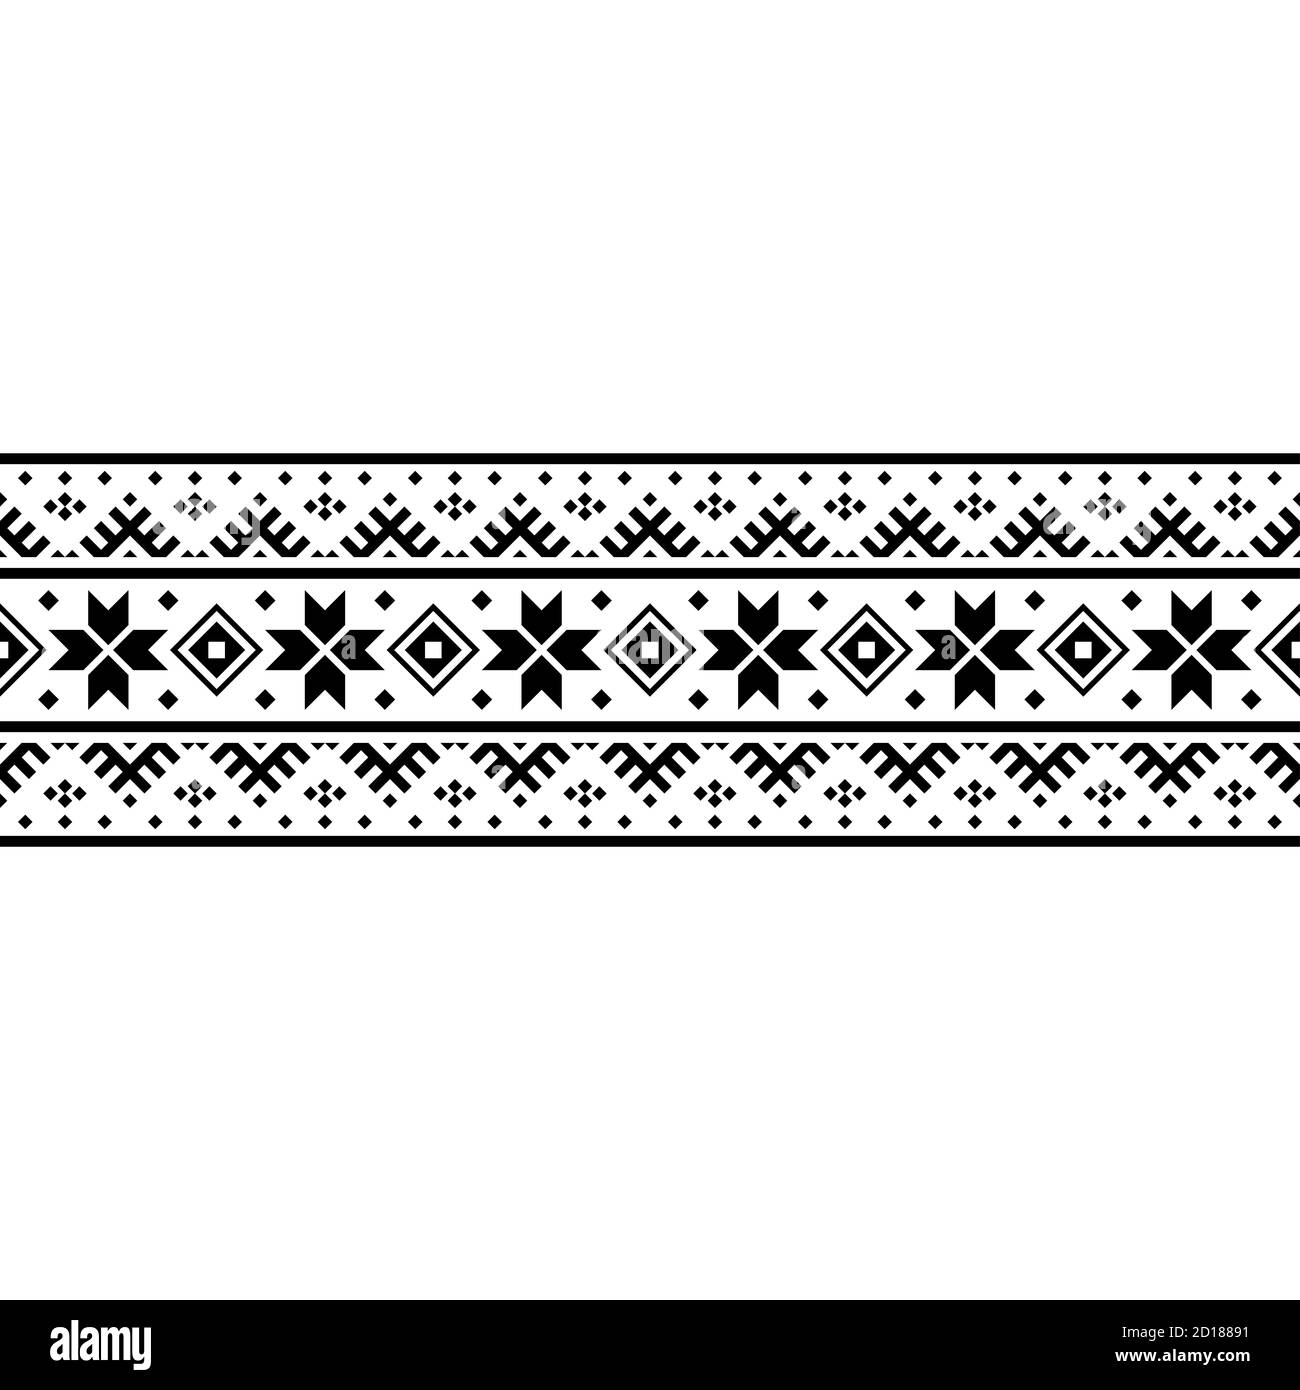 Stripe christmas ethnic traditional motif pattern in black white color.  Design for template of greeting card, invitation, banner, background or etc  Stock Photo - Alamy